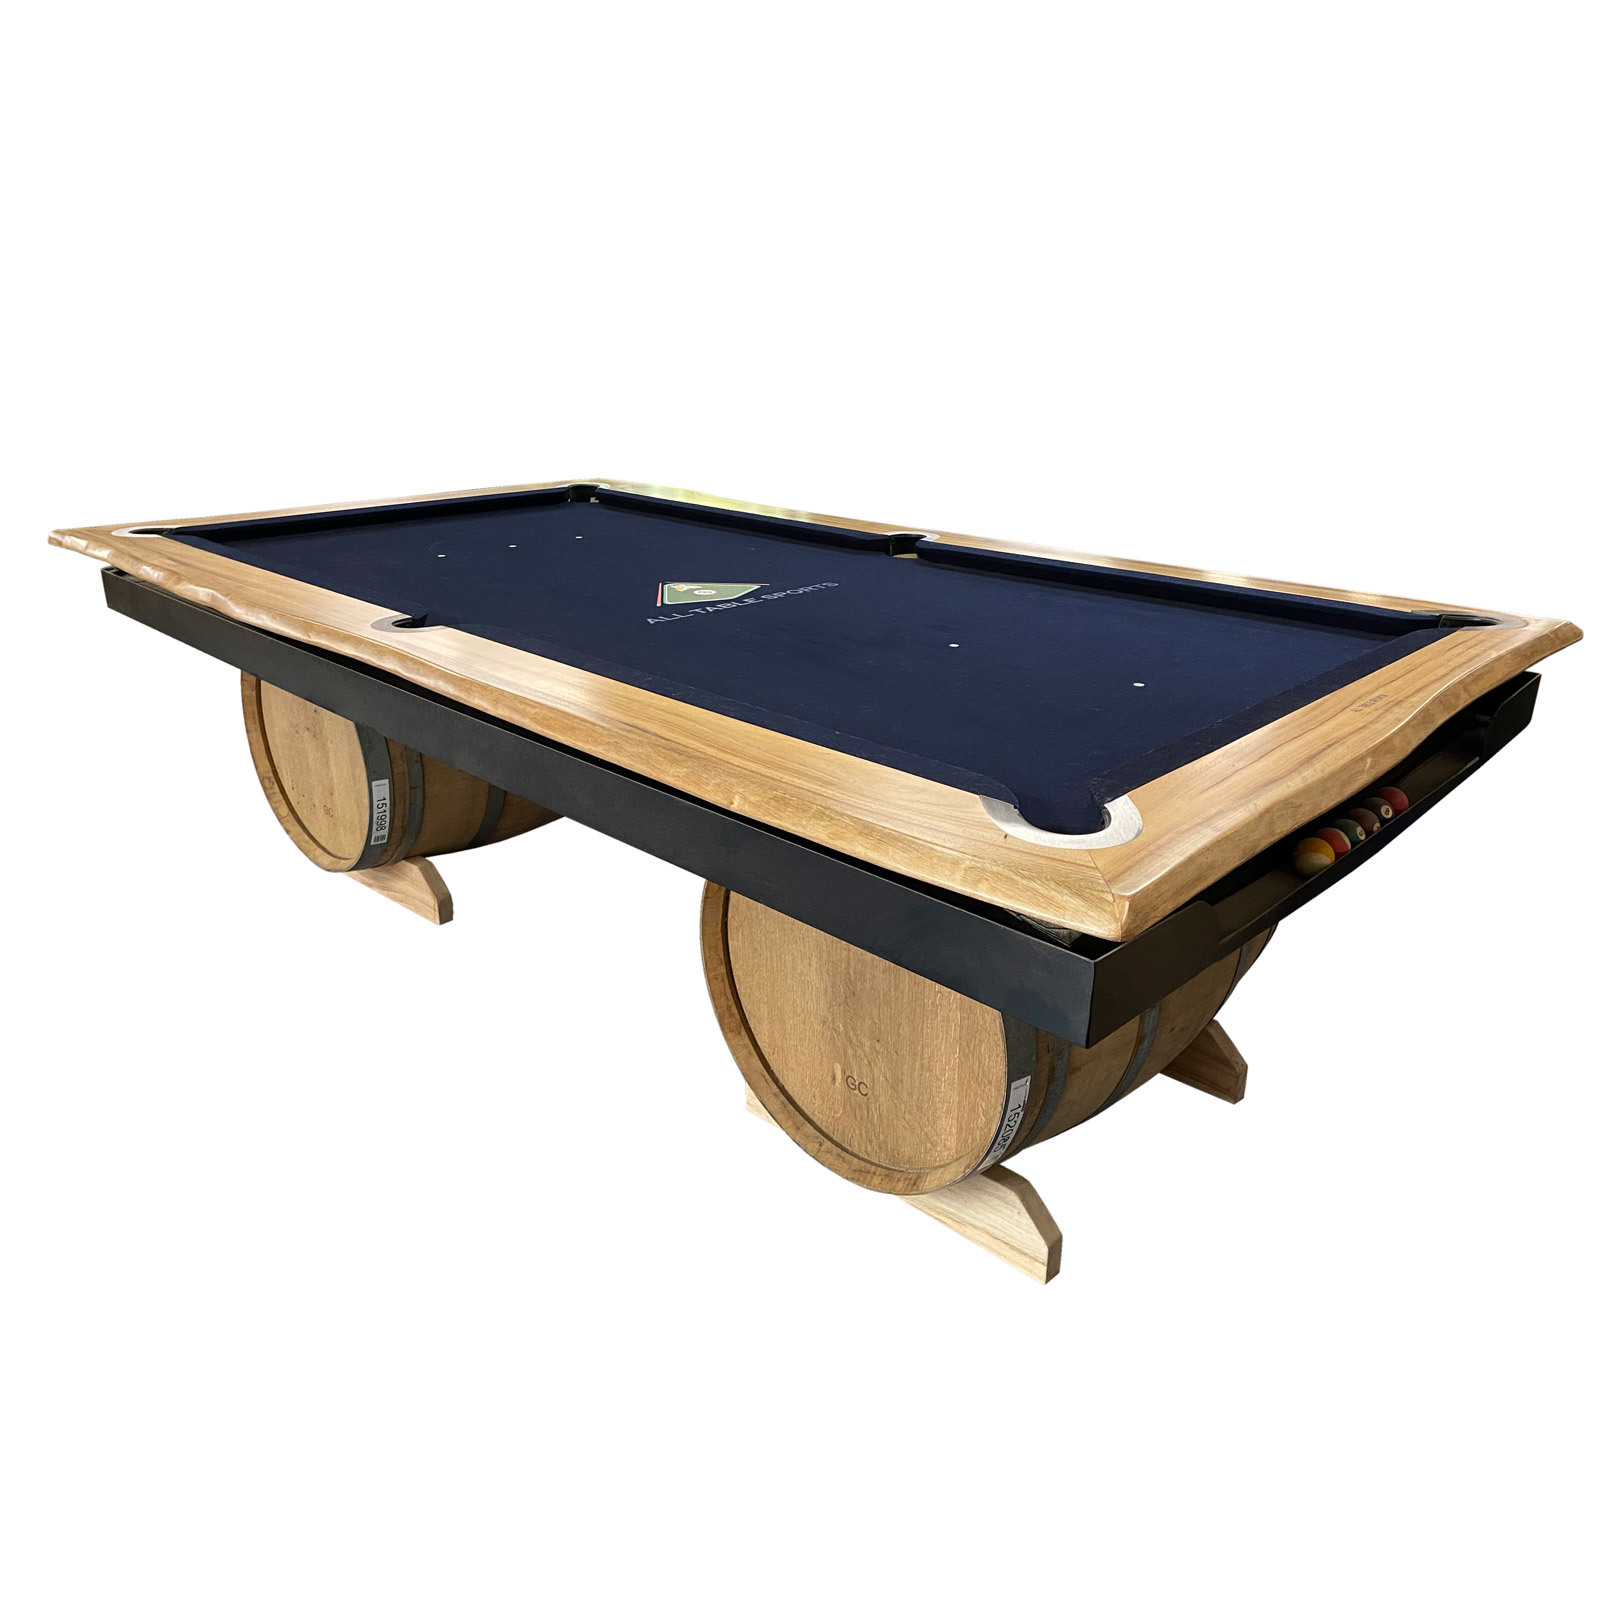 Pre-Made 8ft SLATE WILD WILD WEST POOL BILLIARDS TABLE with Camphor Timber